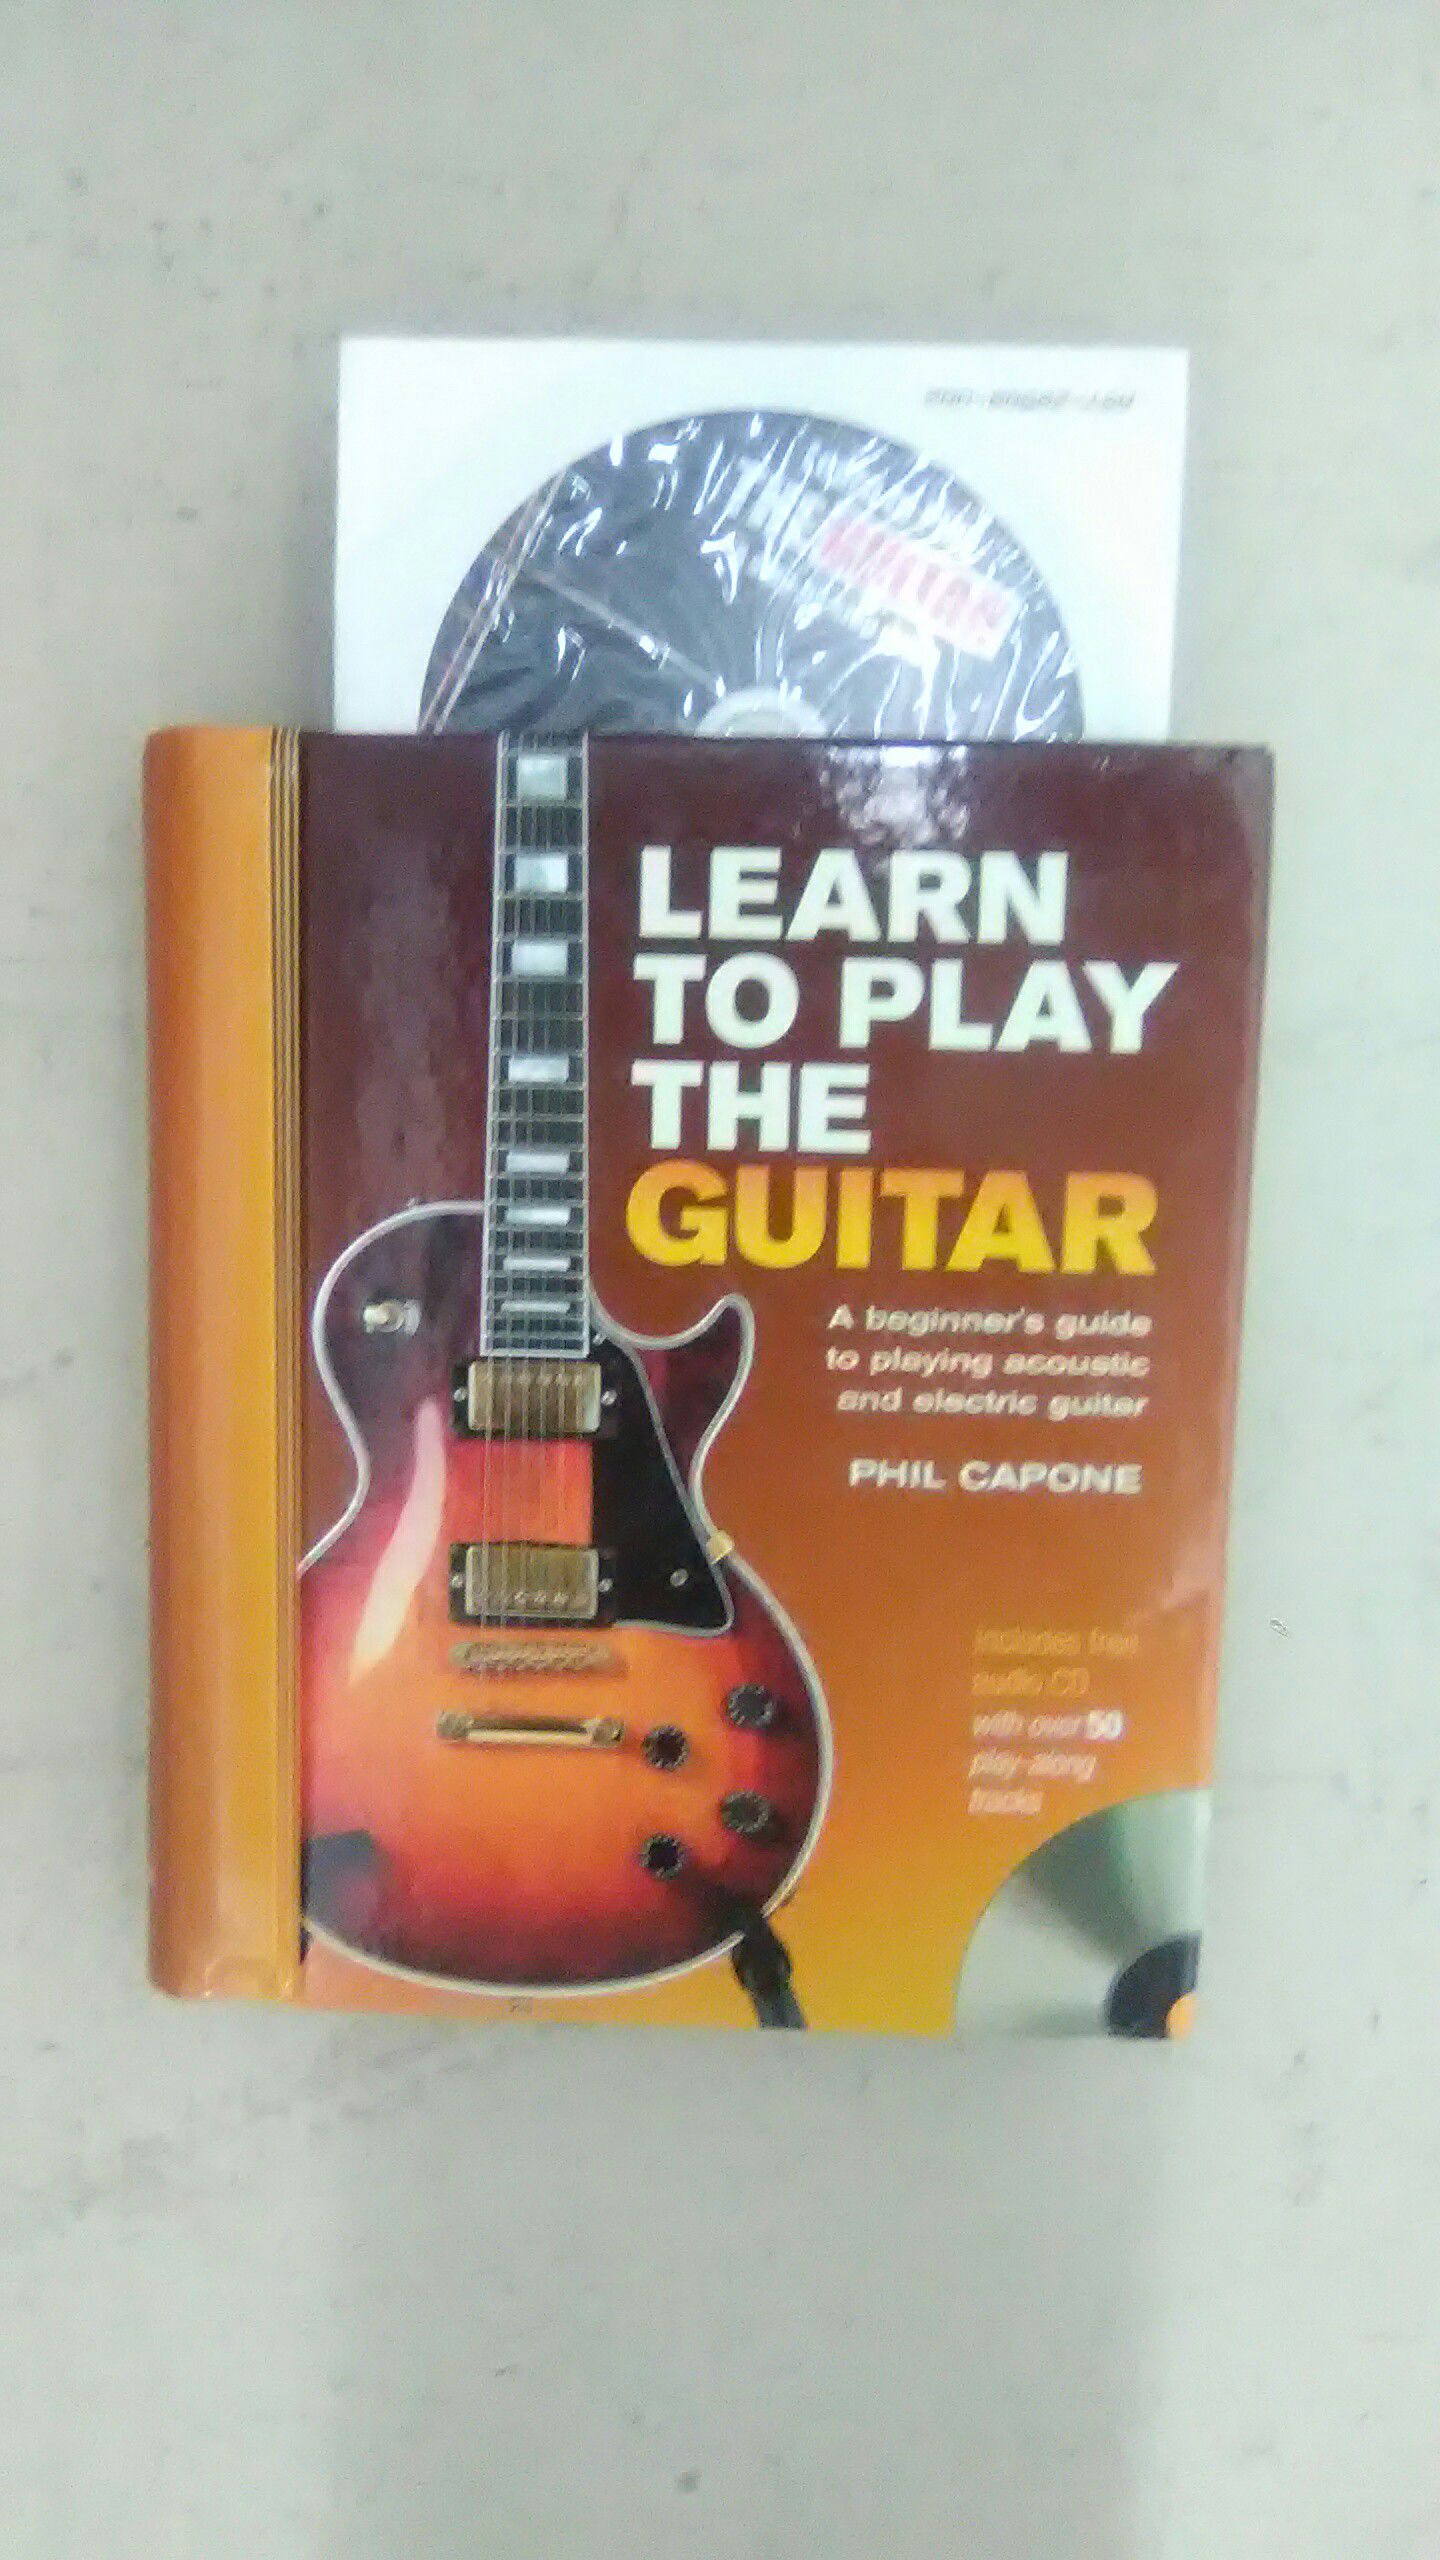 Learn How to Play the Guitar book with CD